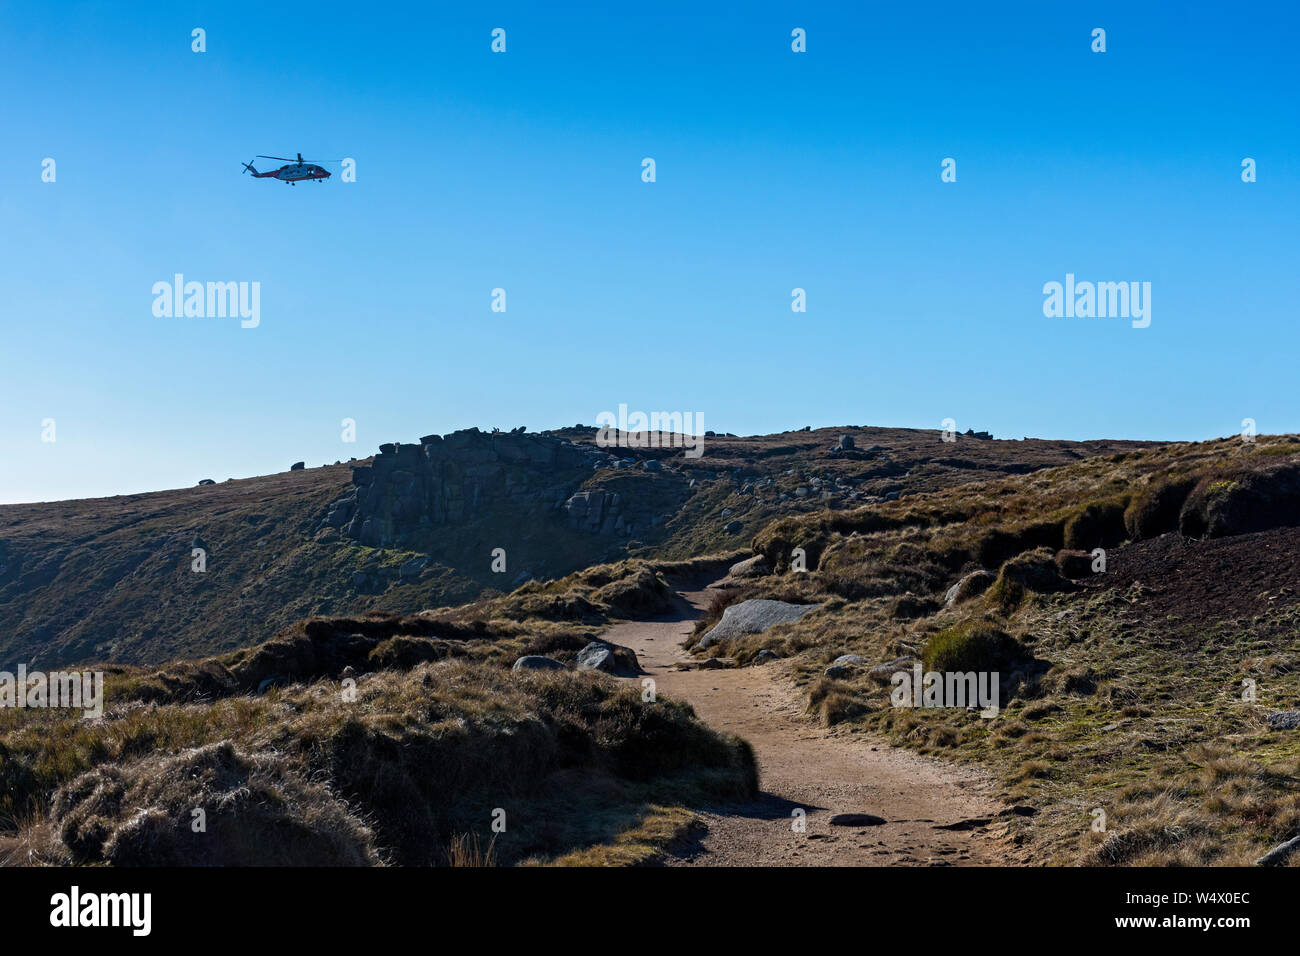 HM Coastguard search and rescue helicopter above the Kinder Scout plateau, Edale, Peak District, Derbyshire, England, UK Stock Photo